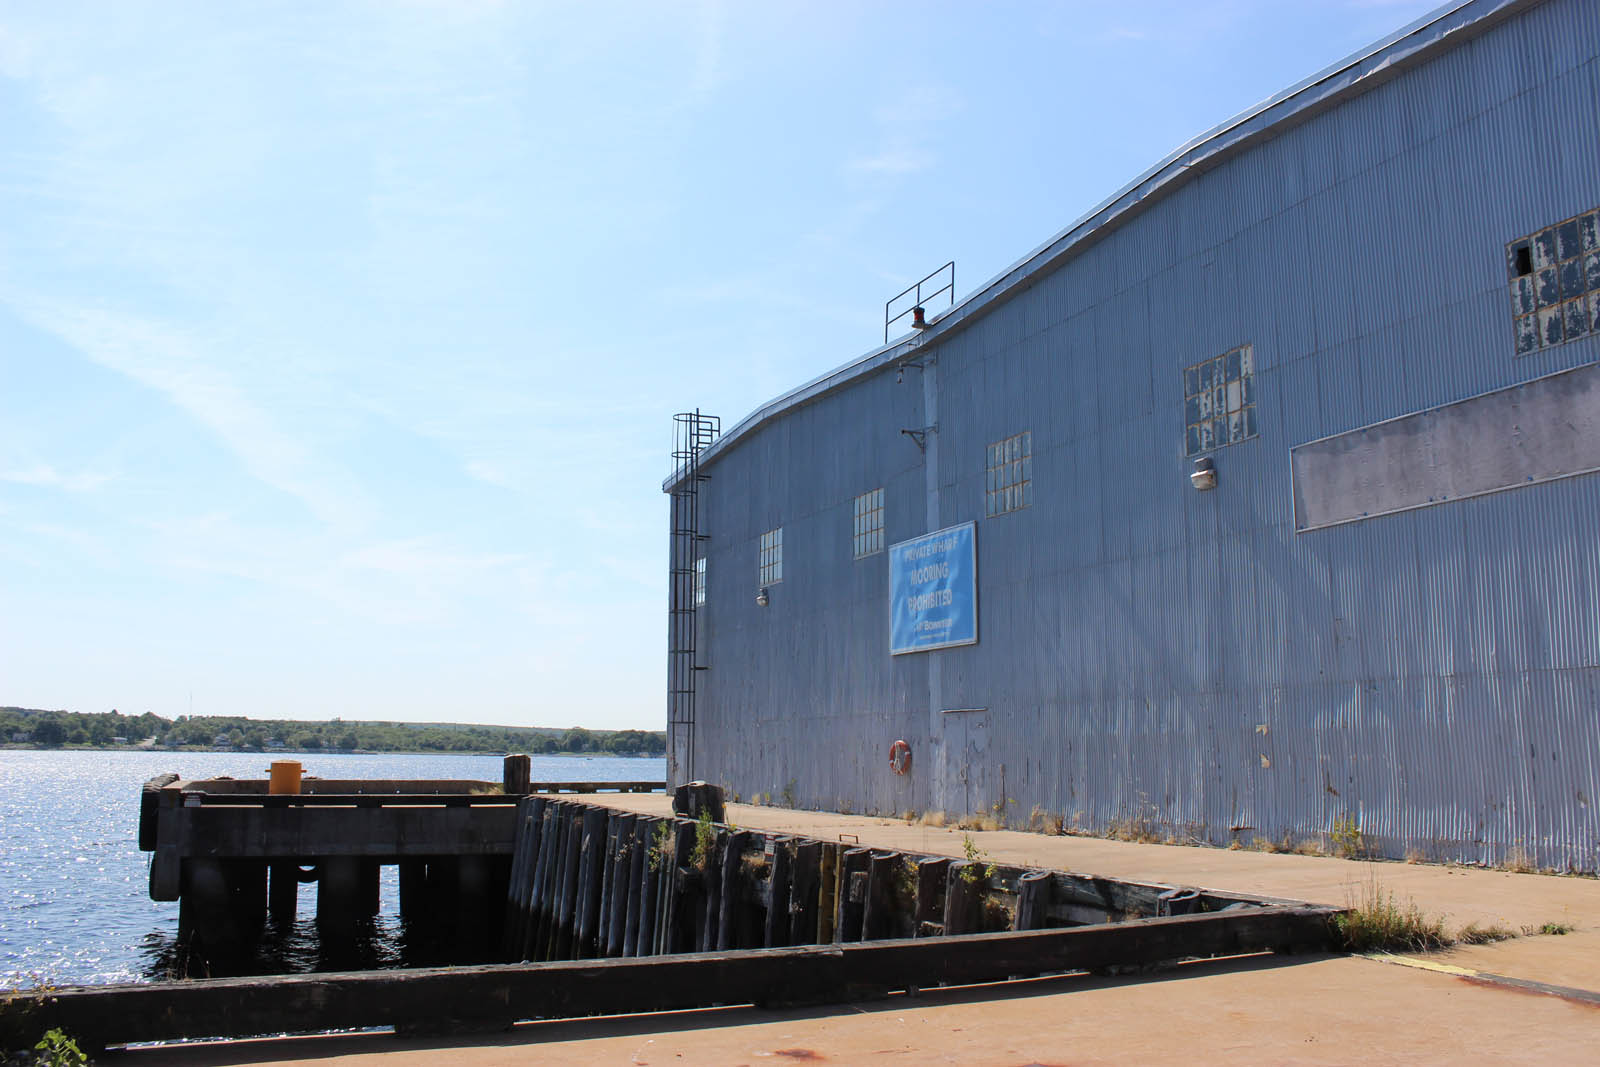 View of backside of wharf